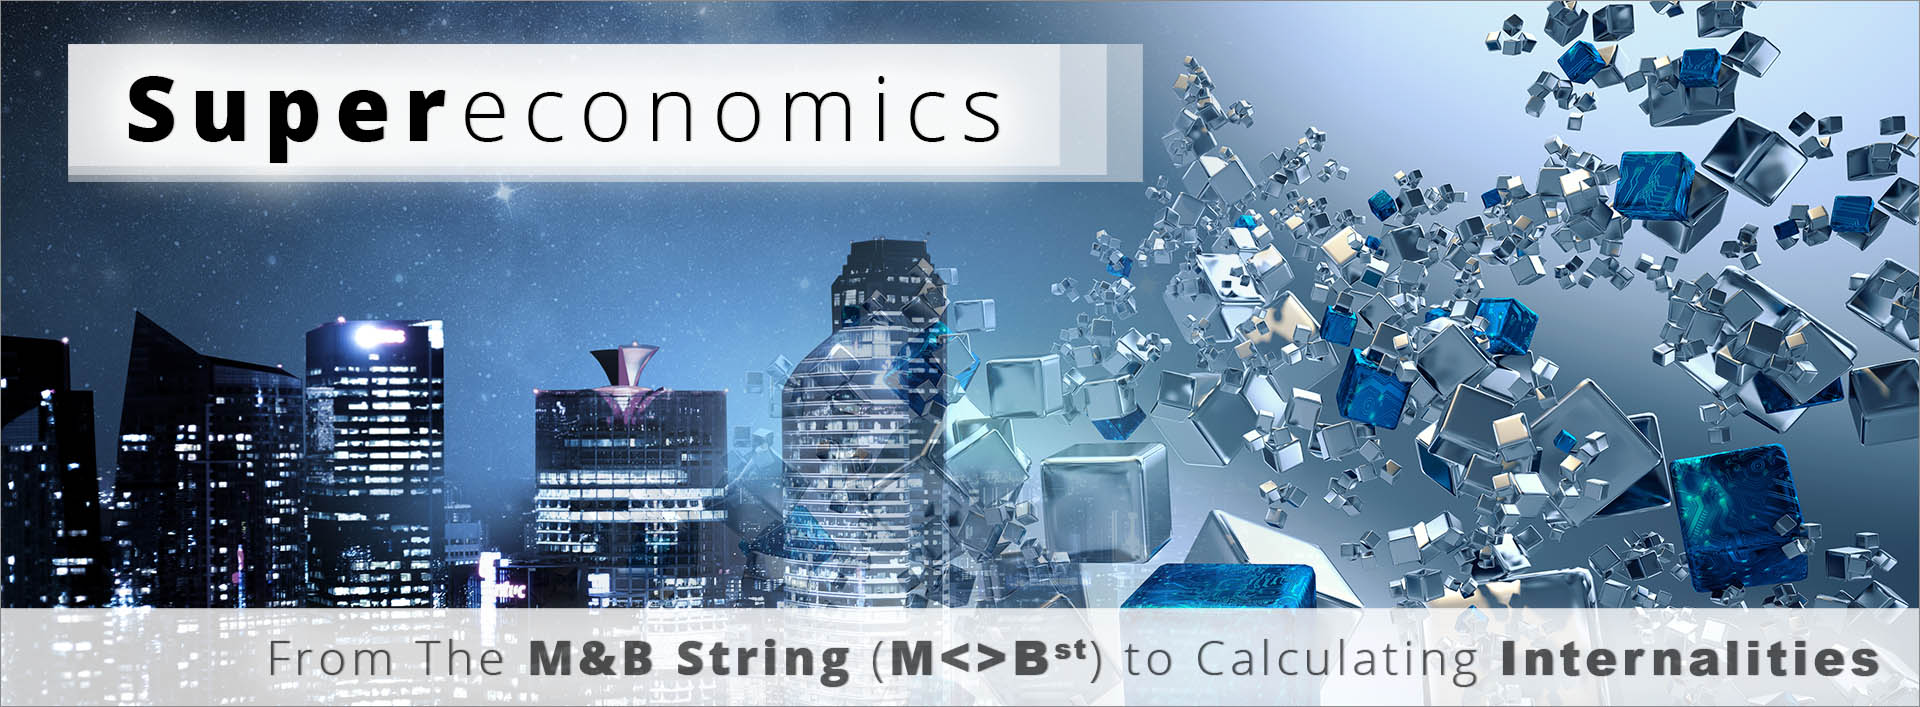 Supereconomics__From-the-M&B-string=(M⇔Bst)-to-Calculating-Internalities__1.01